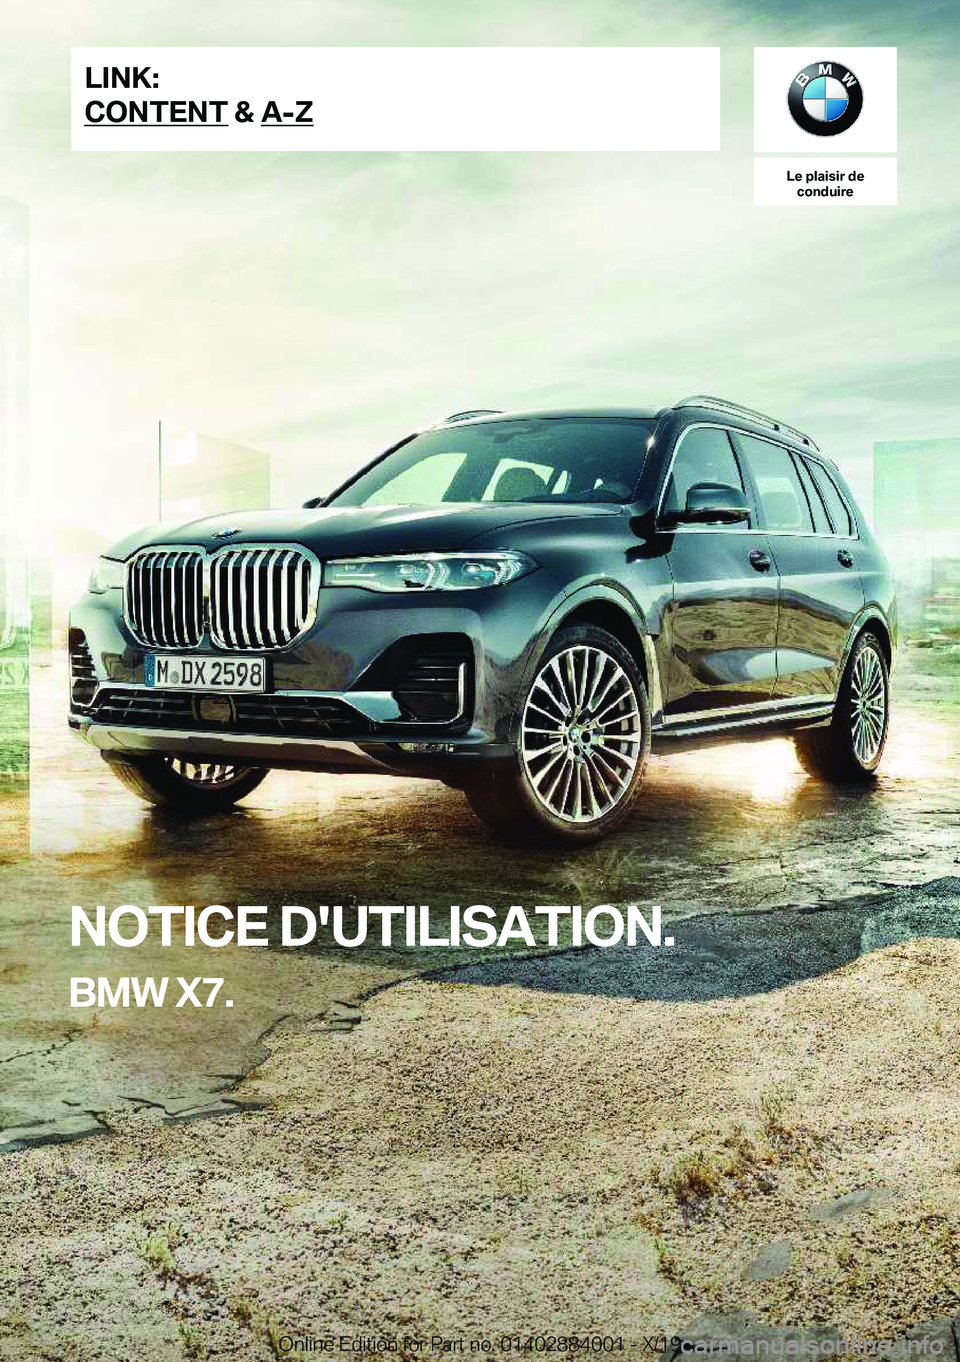 BMW X7 2020  Notices Demploi (in French) �L�e��p�l�a�i�s�i�r��d�e�c�o�n�d�u�i�r�e
�N�O�T�I�C�E��D�'�U�T�I�L�I�S�A�T�I�O�N�.
�B�M�W��X�7�.�L�I�N�K�:
�C�O�N�T�E�N�T��&��A�-�Z�O�n�l�i�n�e��E�d�i�t�i�o�n��f�o�r��P�a�r�t��n�o�.��0�